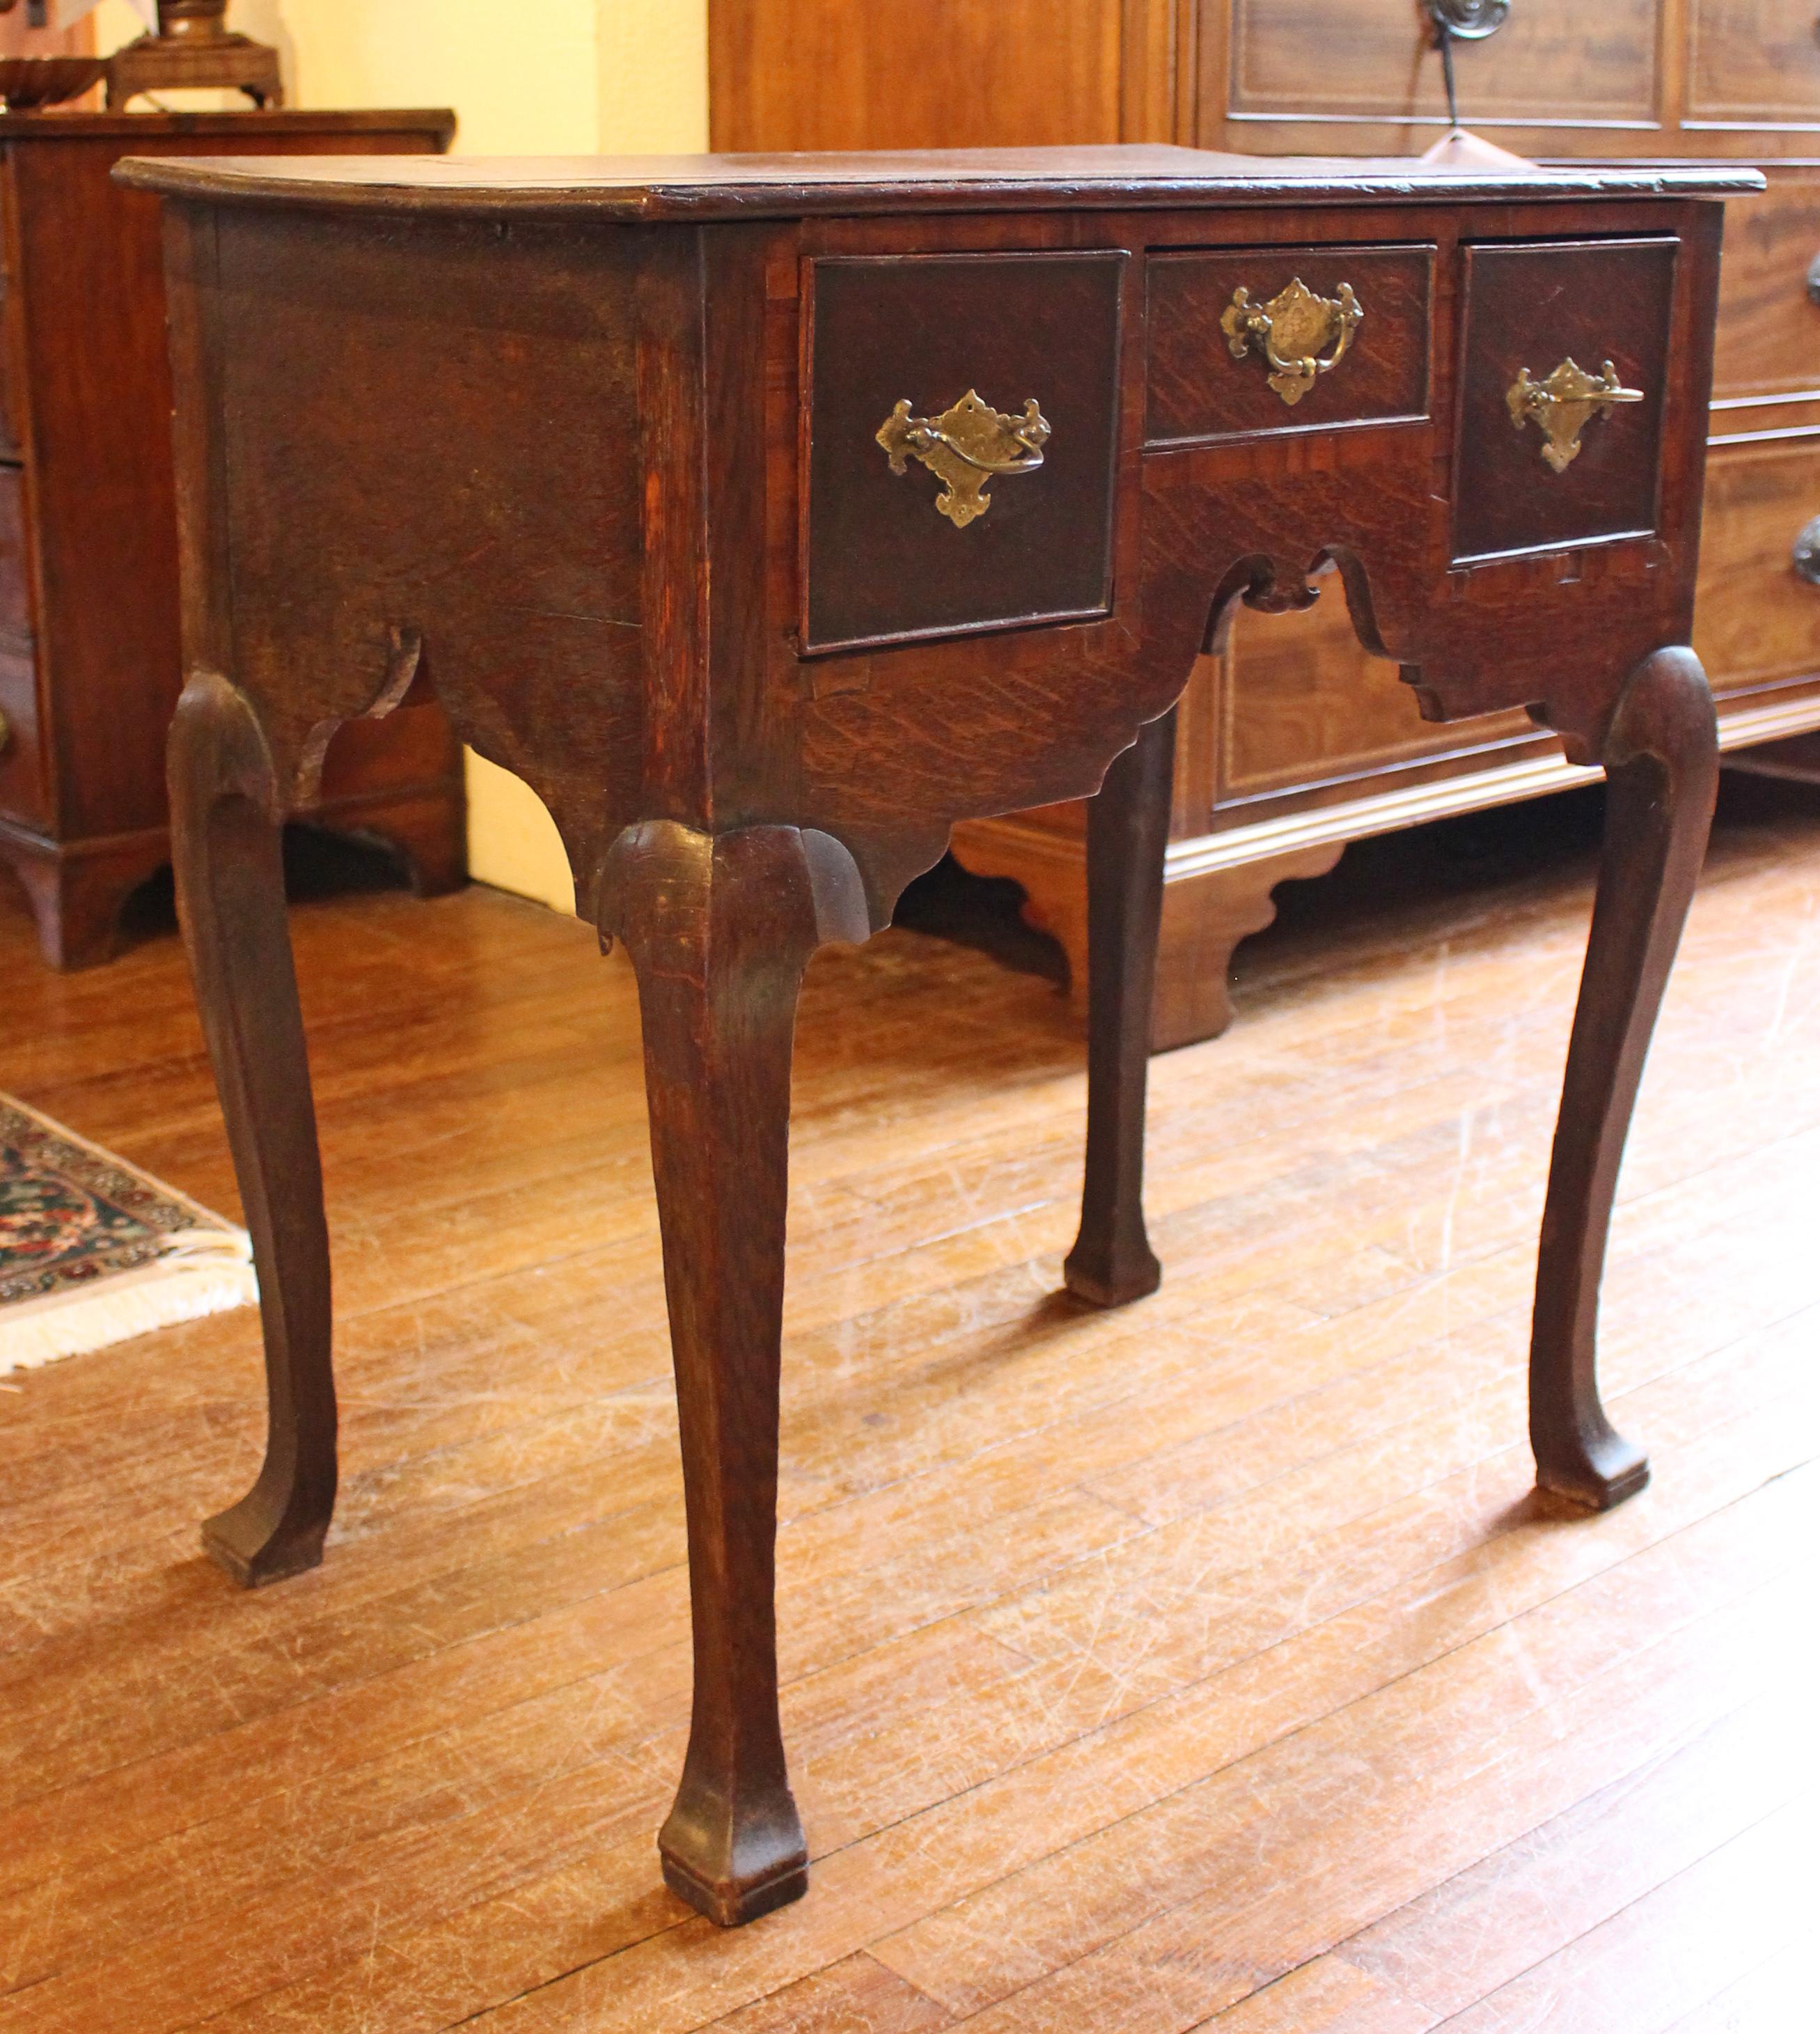 Circa 1730 English Country Oak Lowboy or Dressing Table In Good Condition For Sale In Chapel Hill, NC